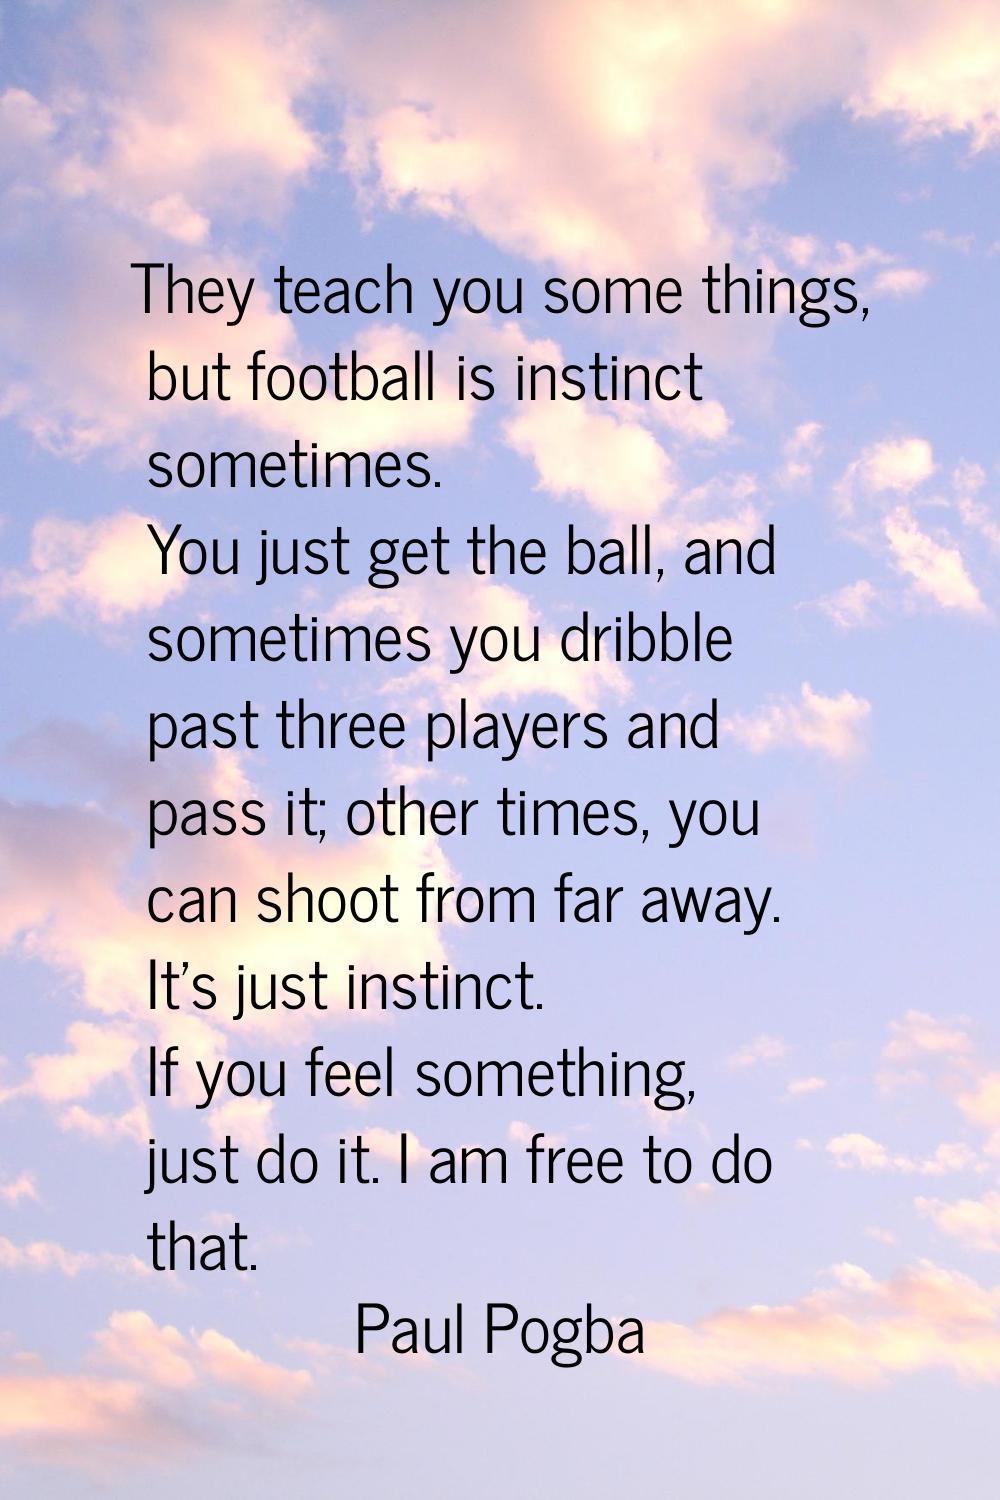 They teach you some things, but football is instinct sometimes. You just get the ball, and sometime